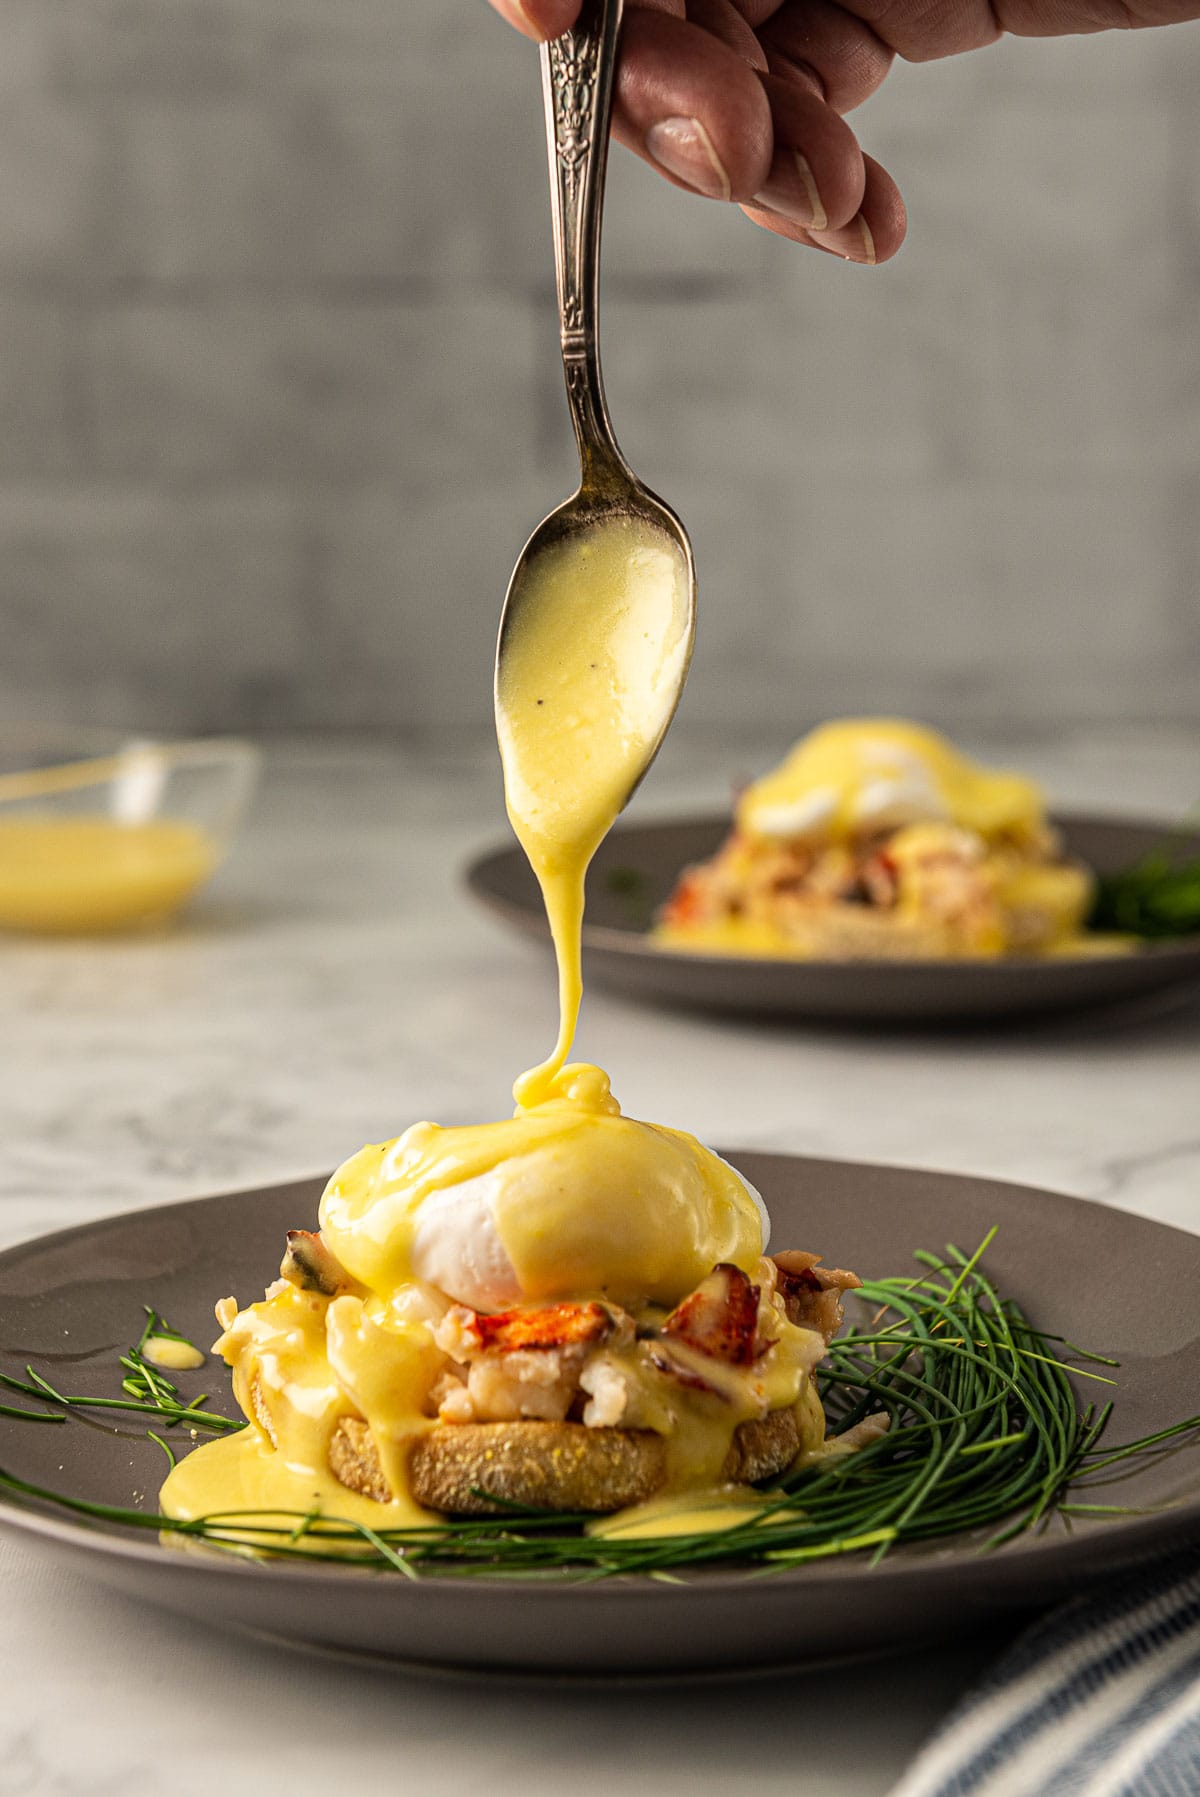 Hollandaise being drizzled off a spoon on to the top of a poached egg Benedict with lobster meat.